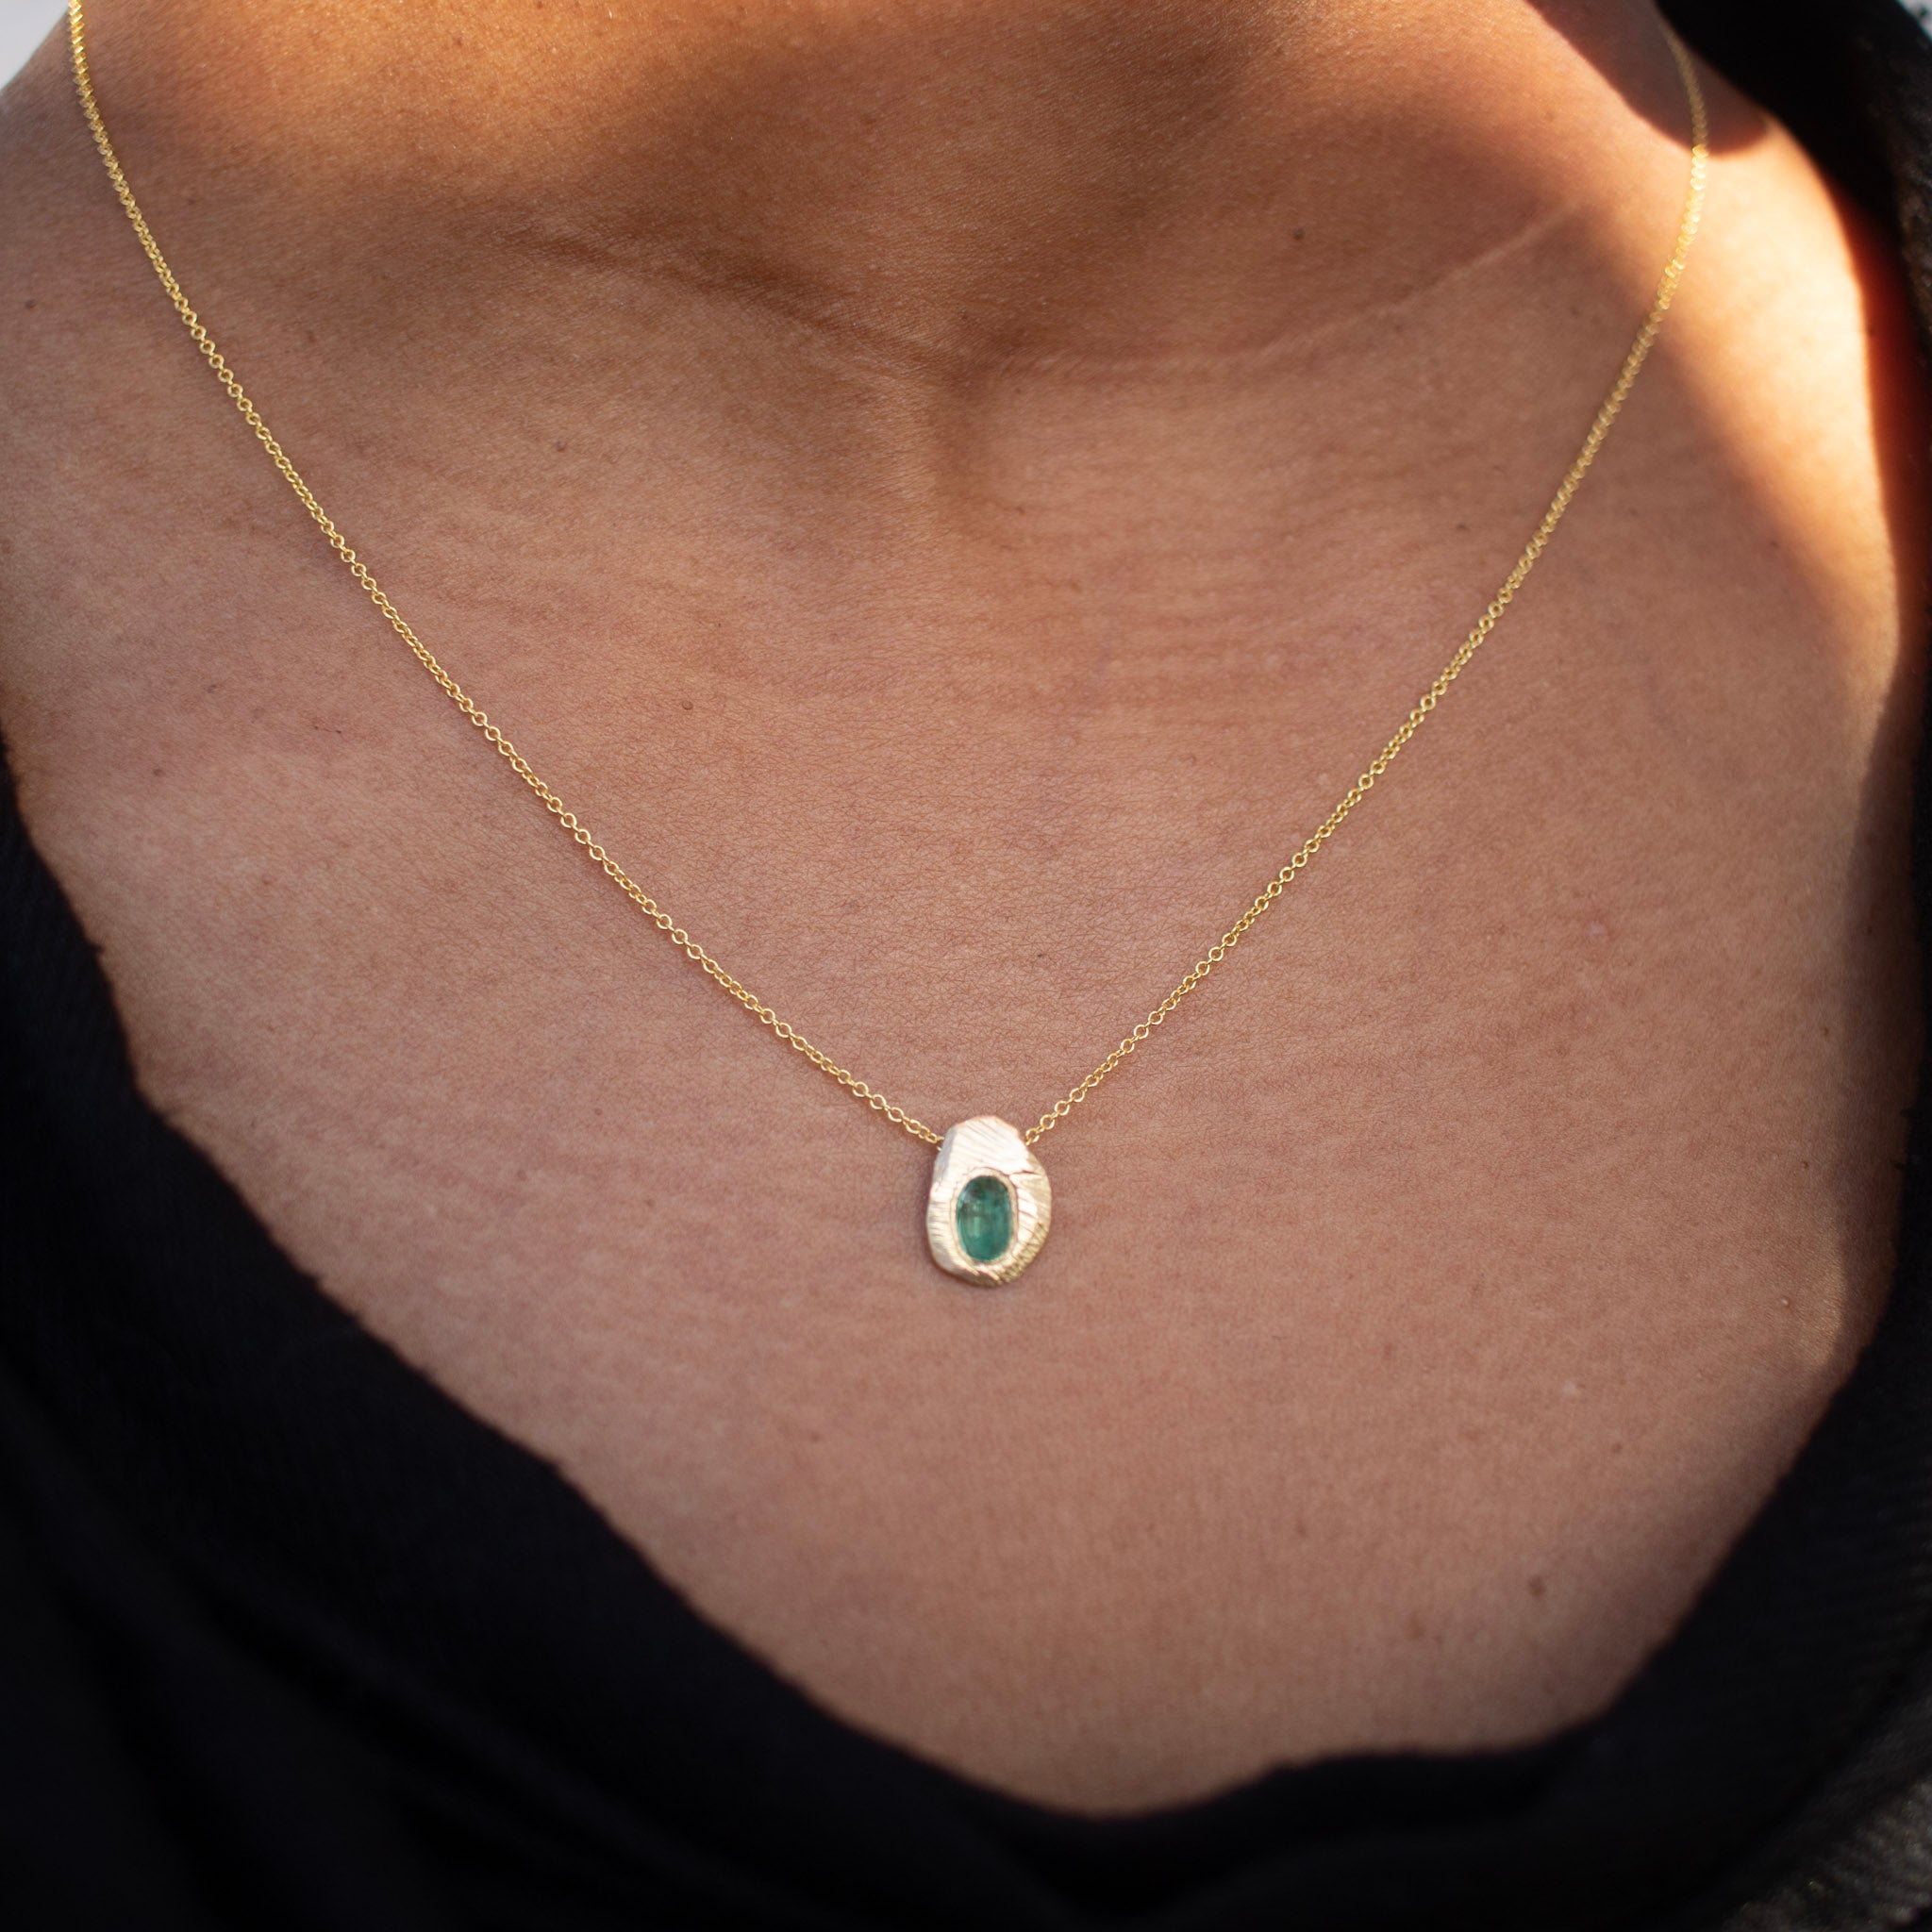 Handmade oval emerald necklace in 18kt gold.